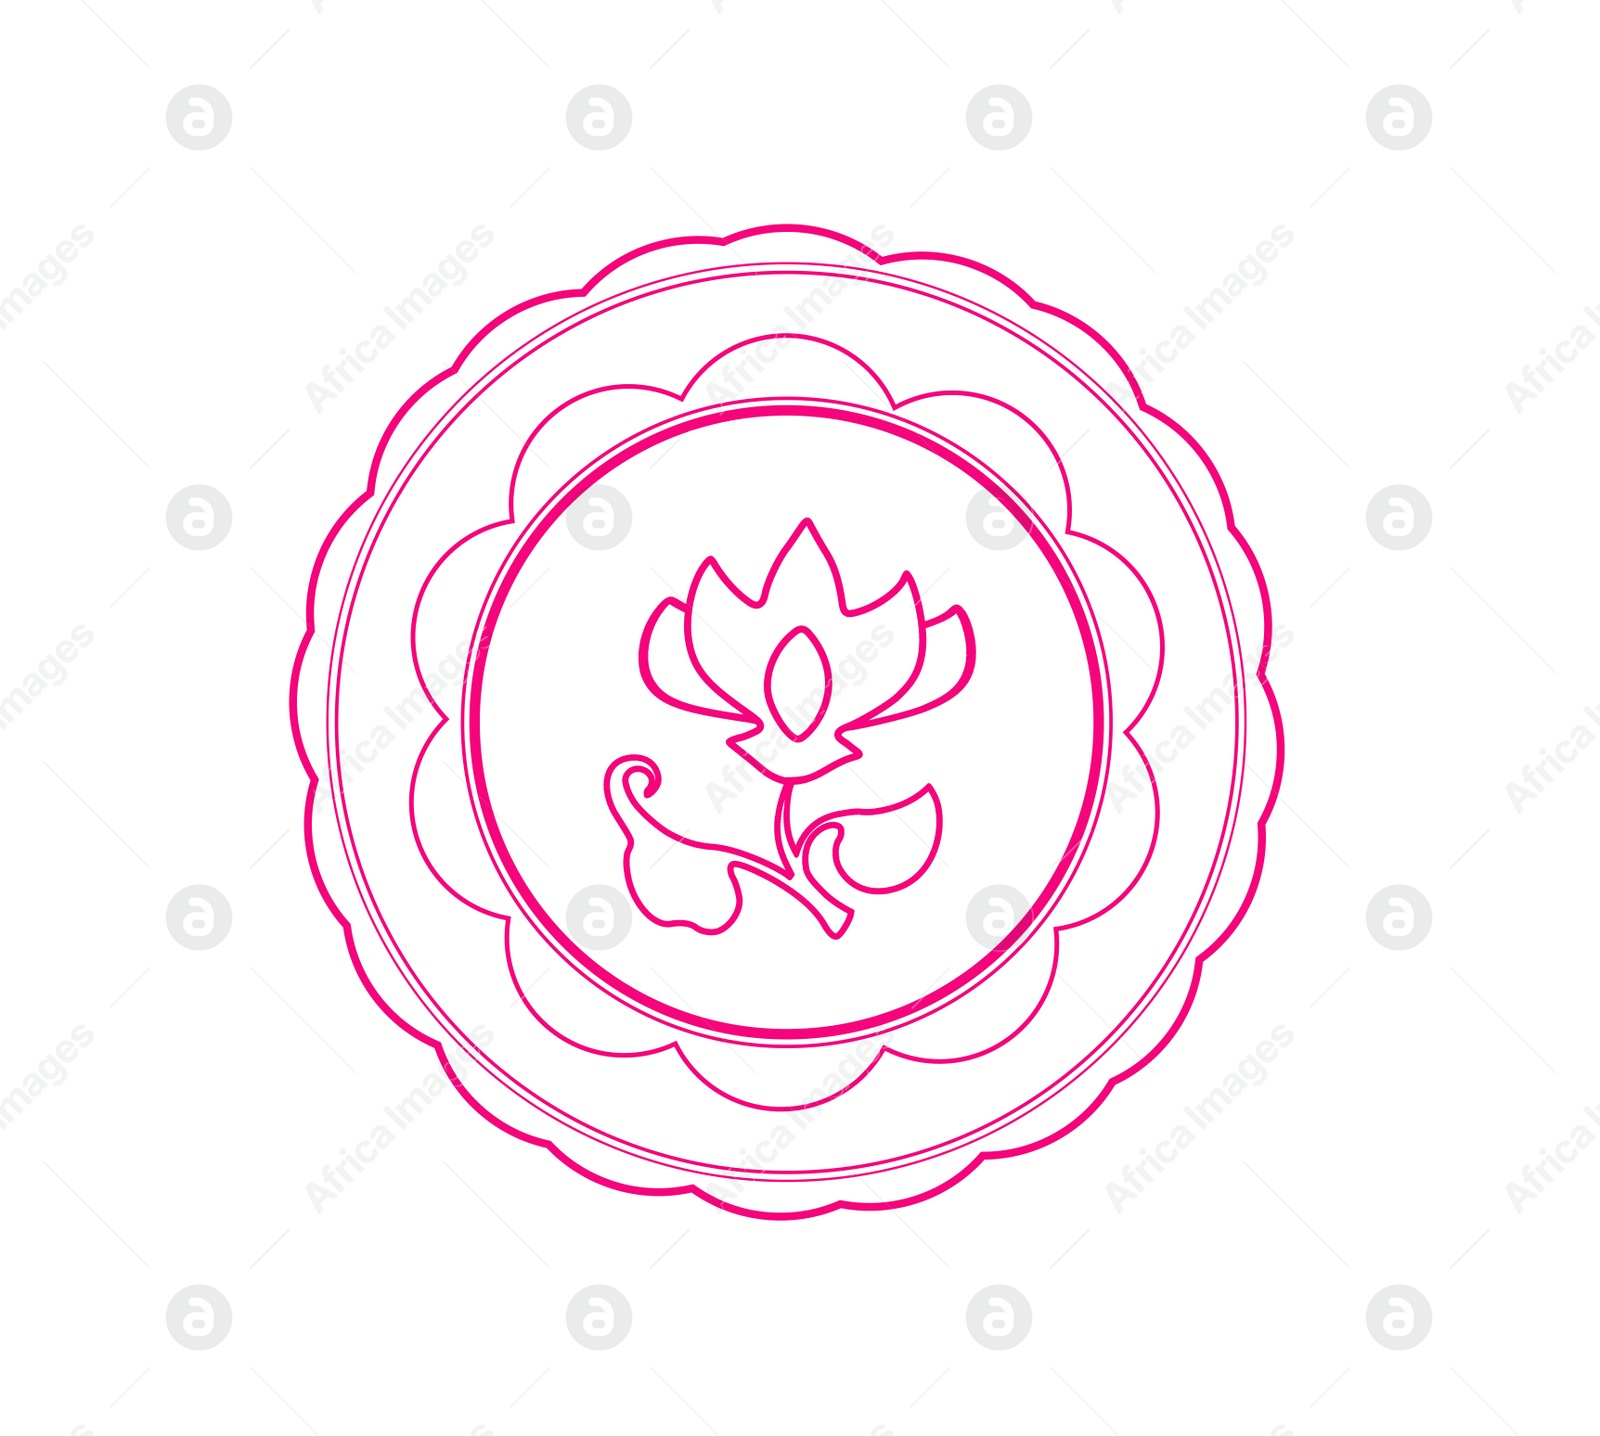 Illustration of Pink wax seal with flower on white background